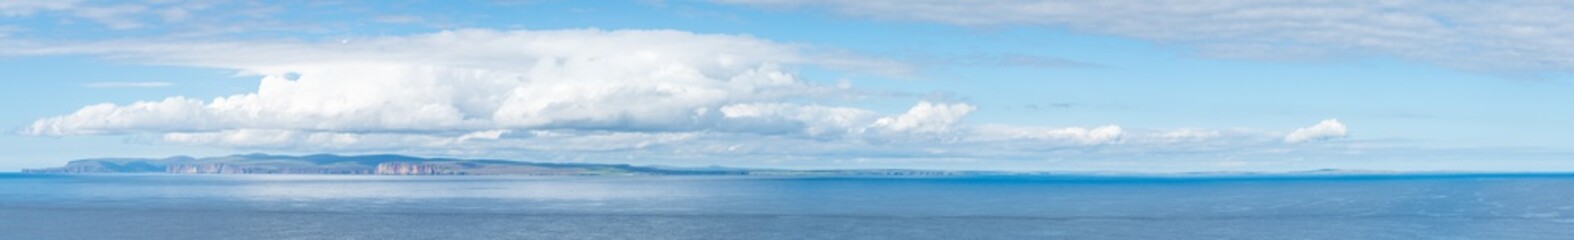 Orkney Islands as seen from Dunnet Head, the most northerly point of the mainland of Great Britain.